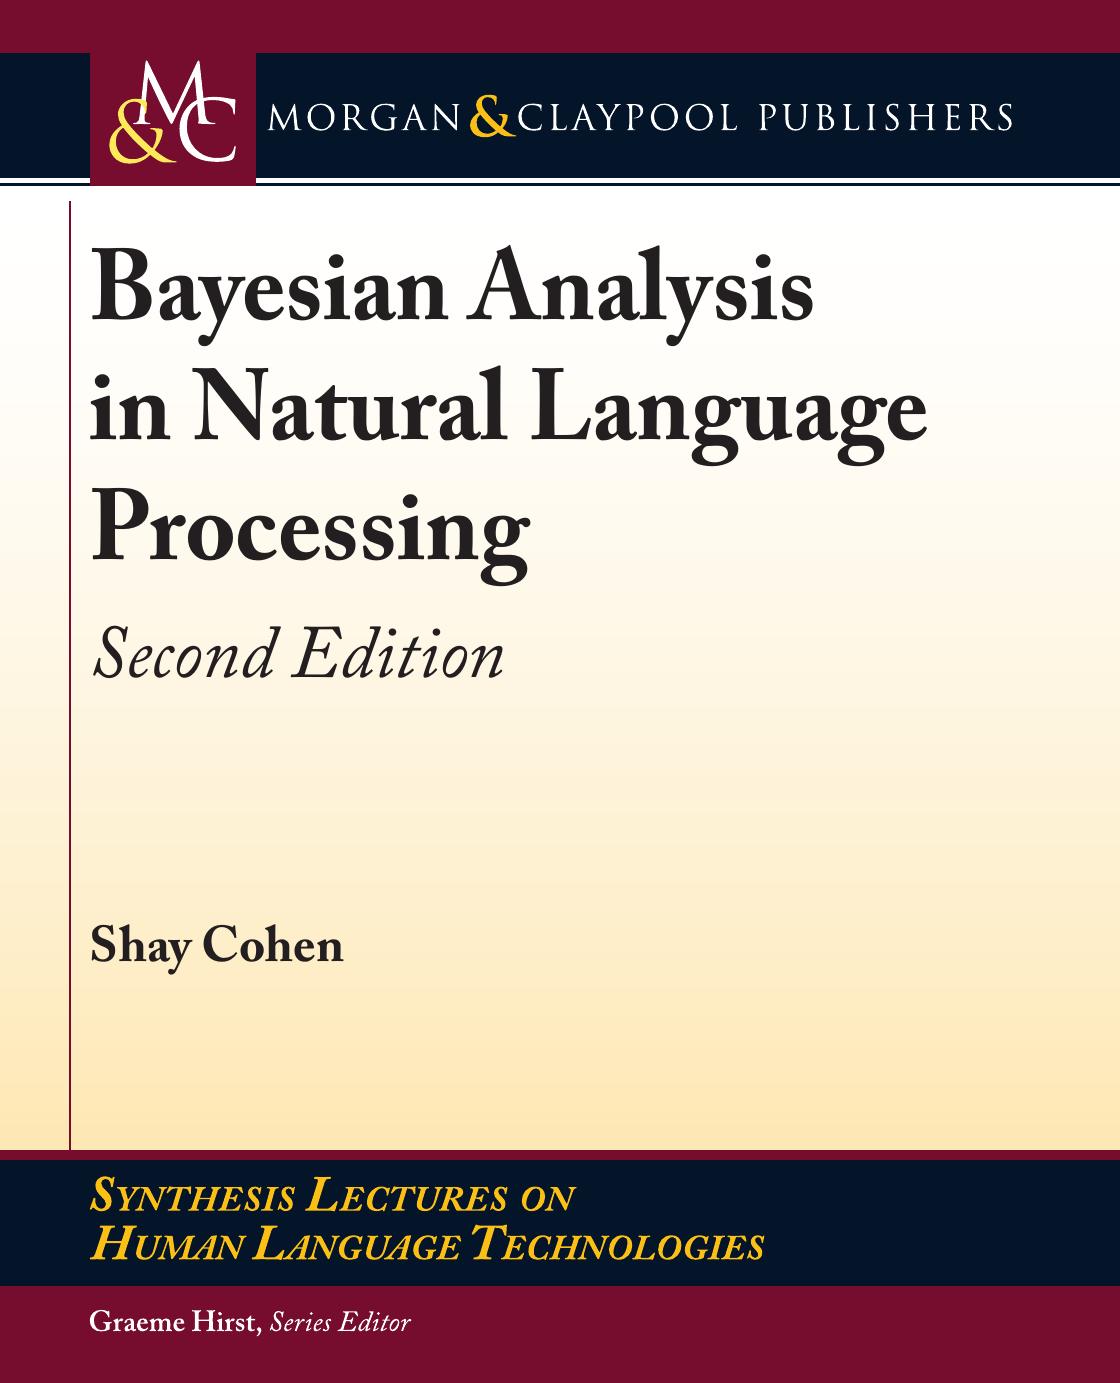 Bayesian Analysis in Natural Language Processing: Second Edition